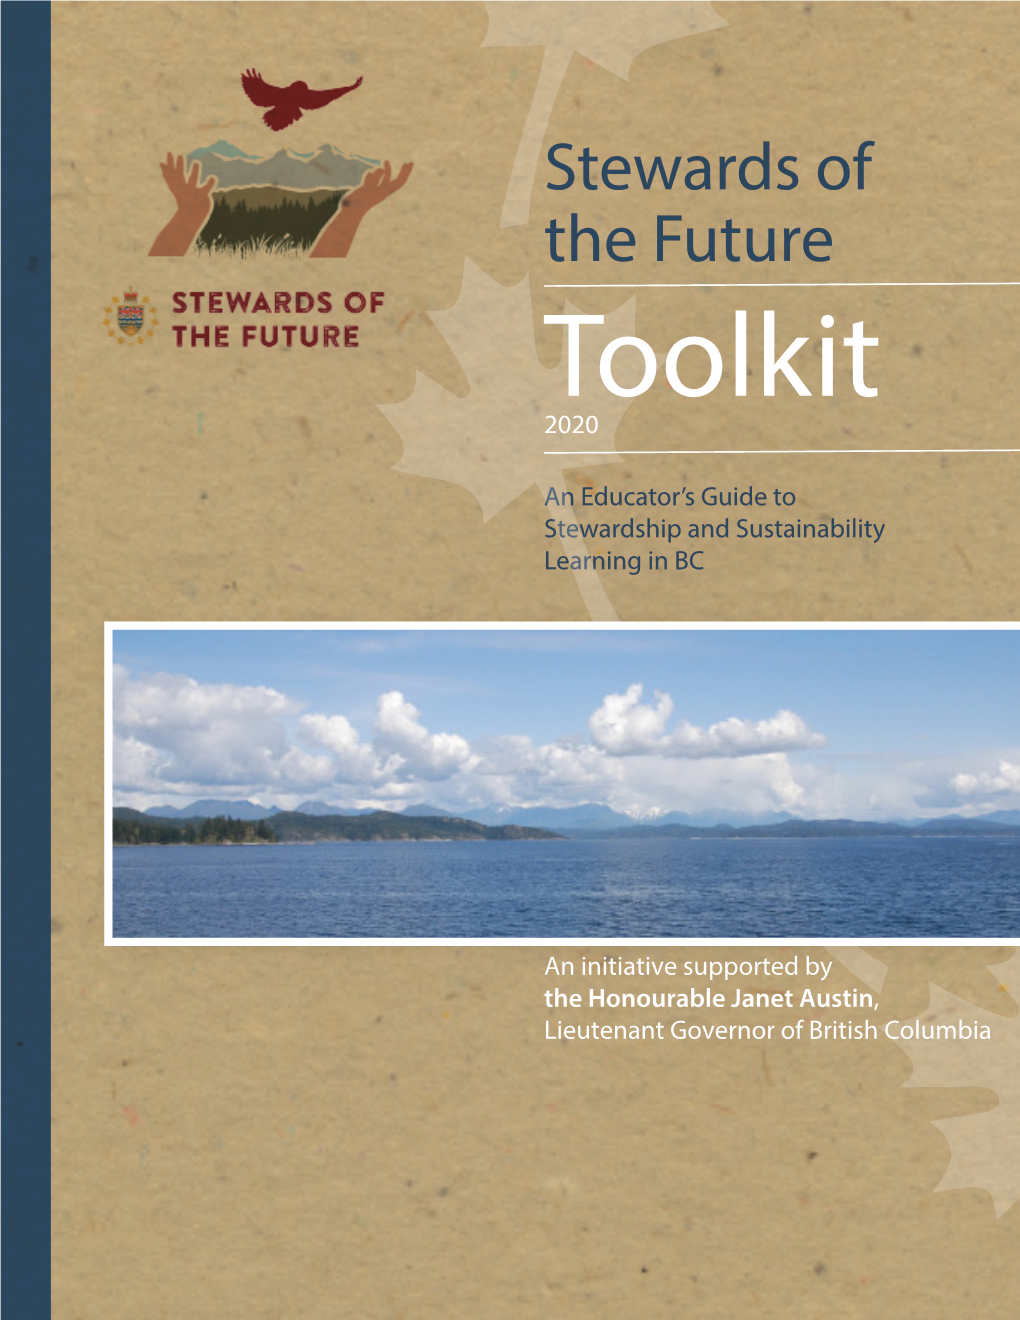 Stewards of the Future 2020 Toolkit